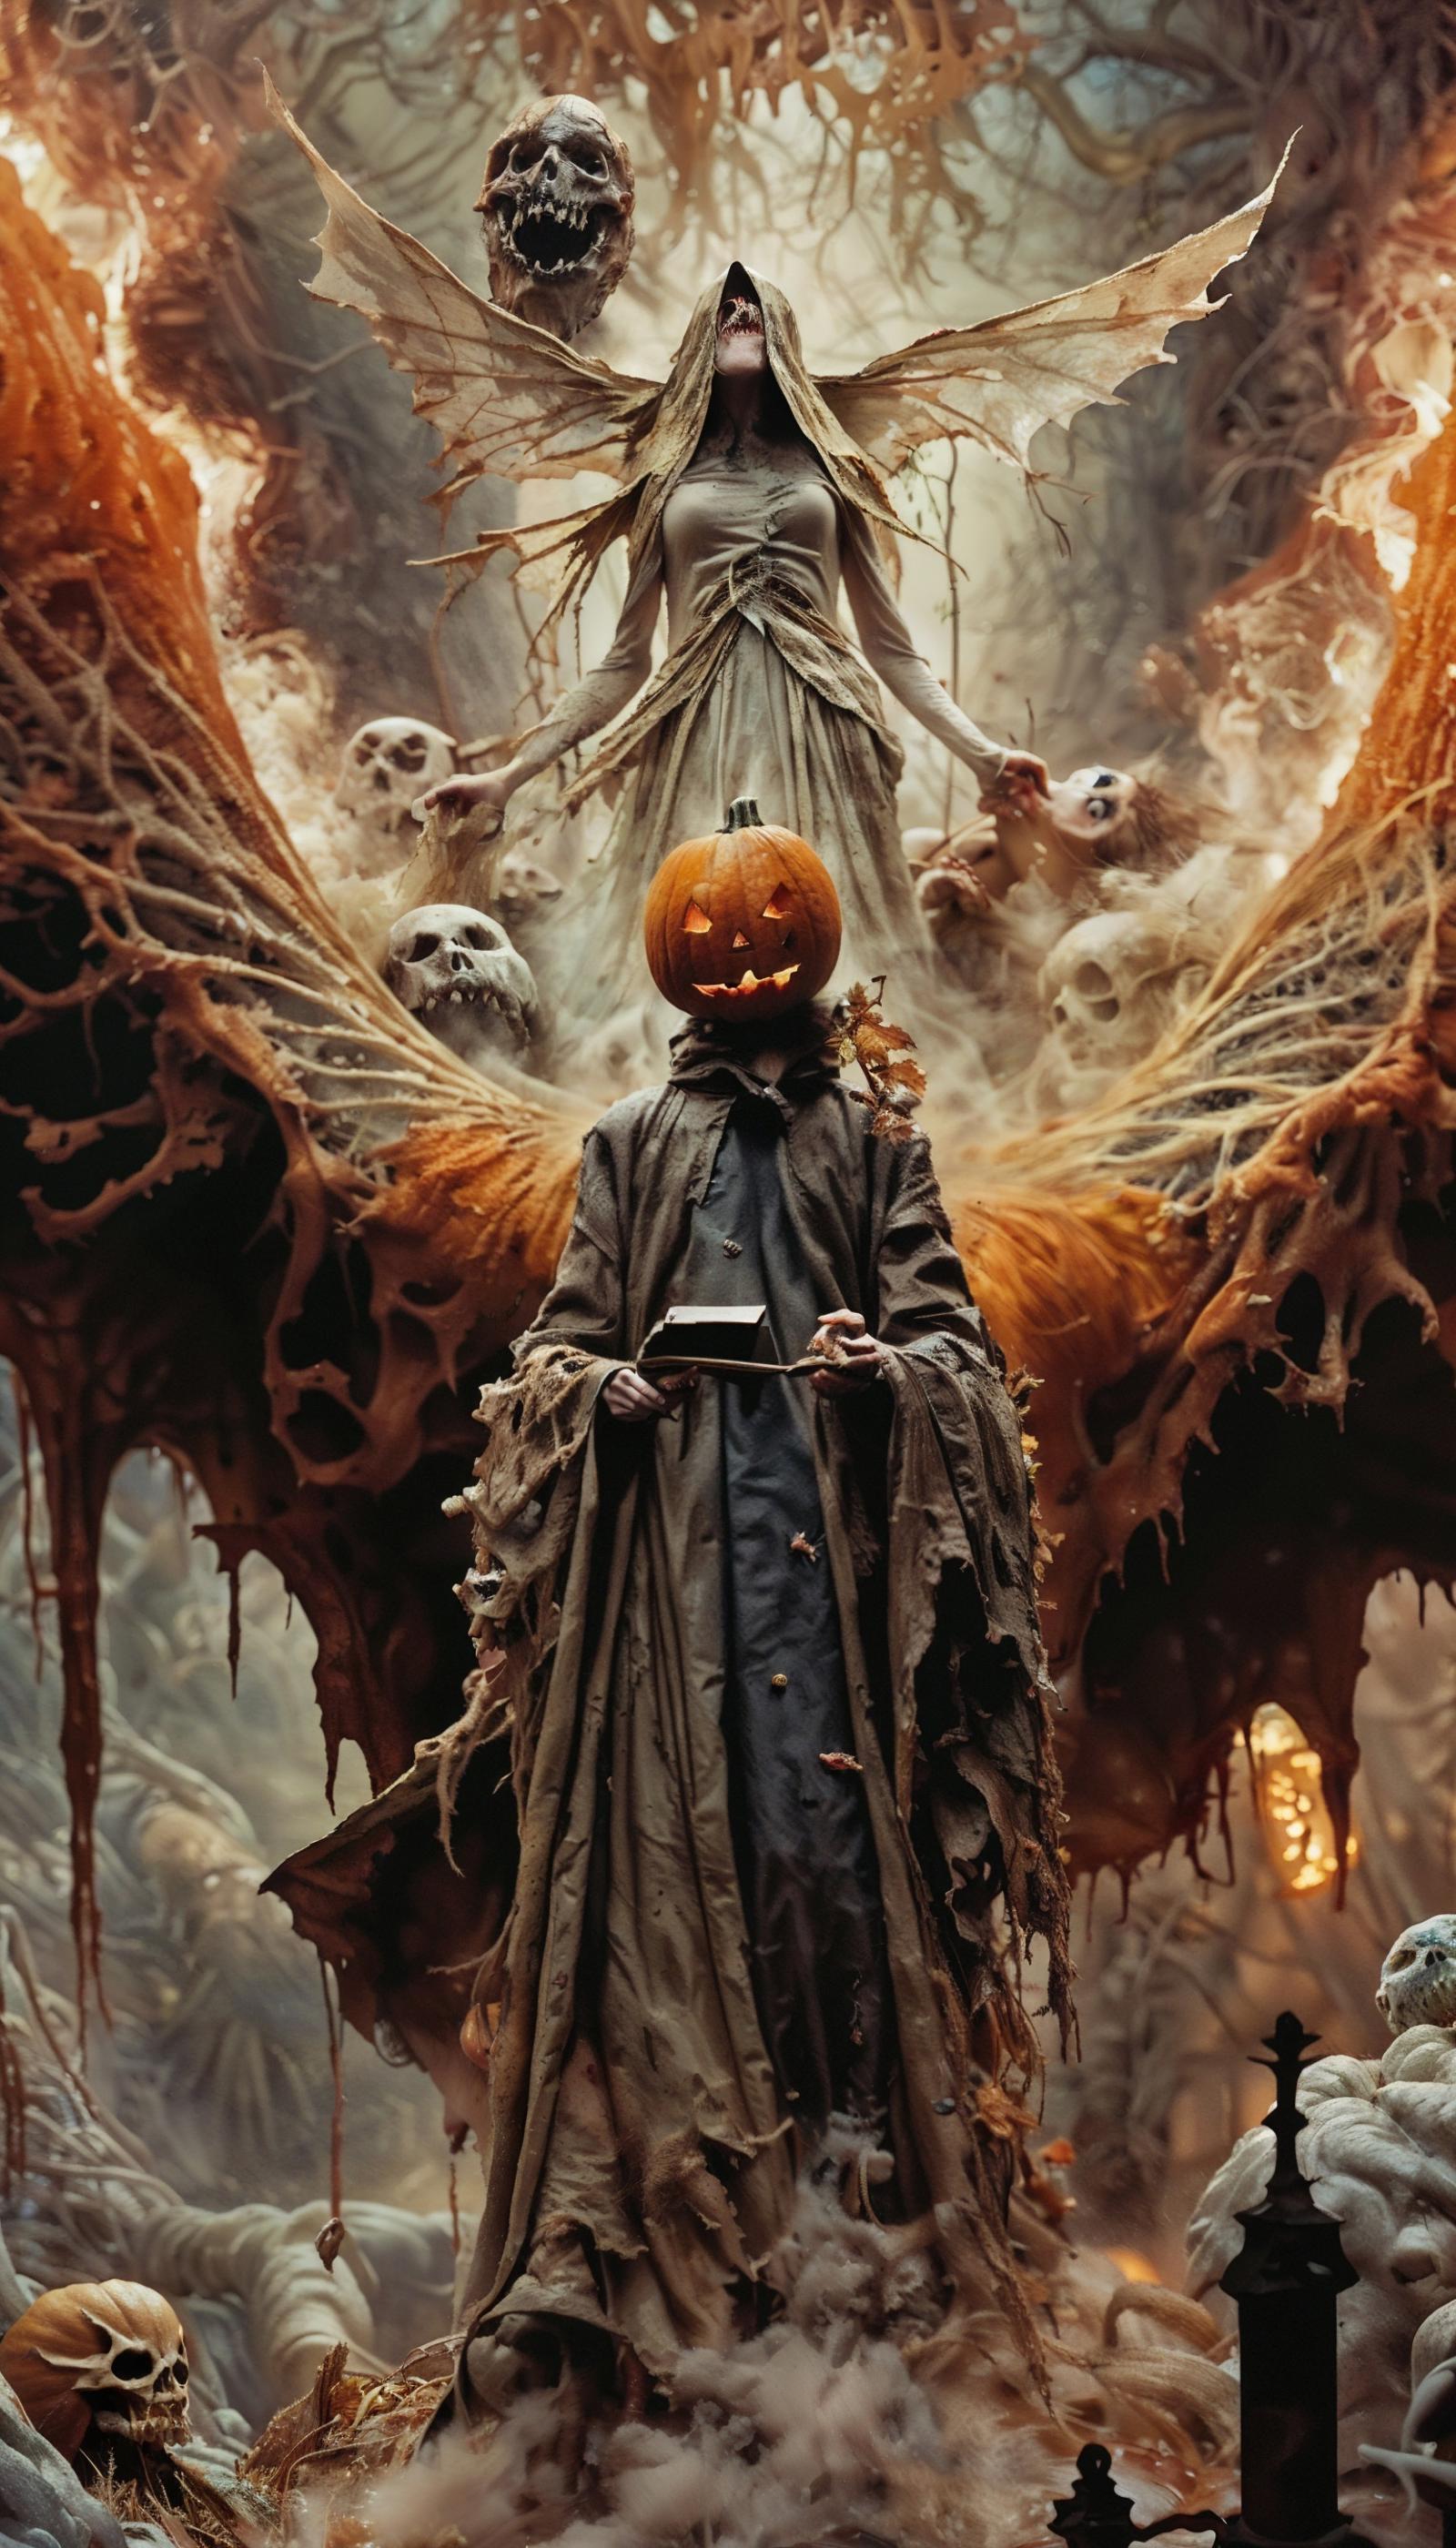 A man in a witch's costume holding a book with a pumpkin on his head and other skeleton figures in the background.